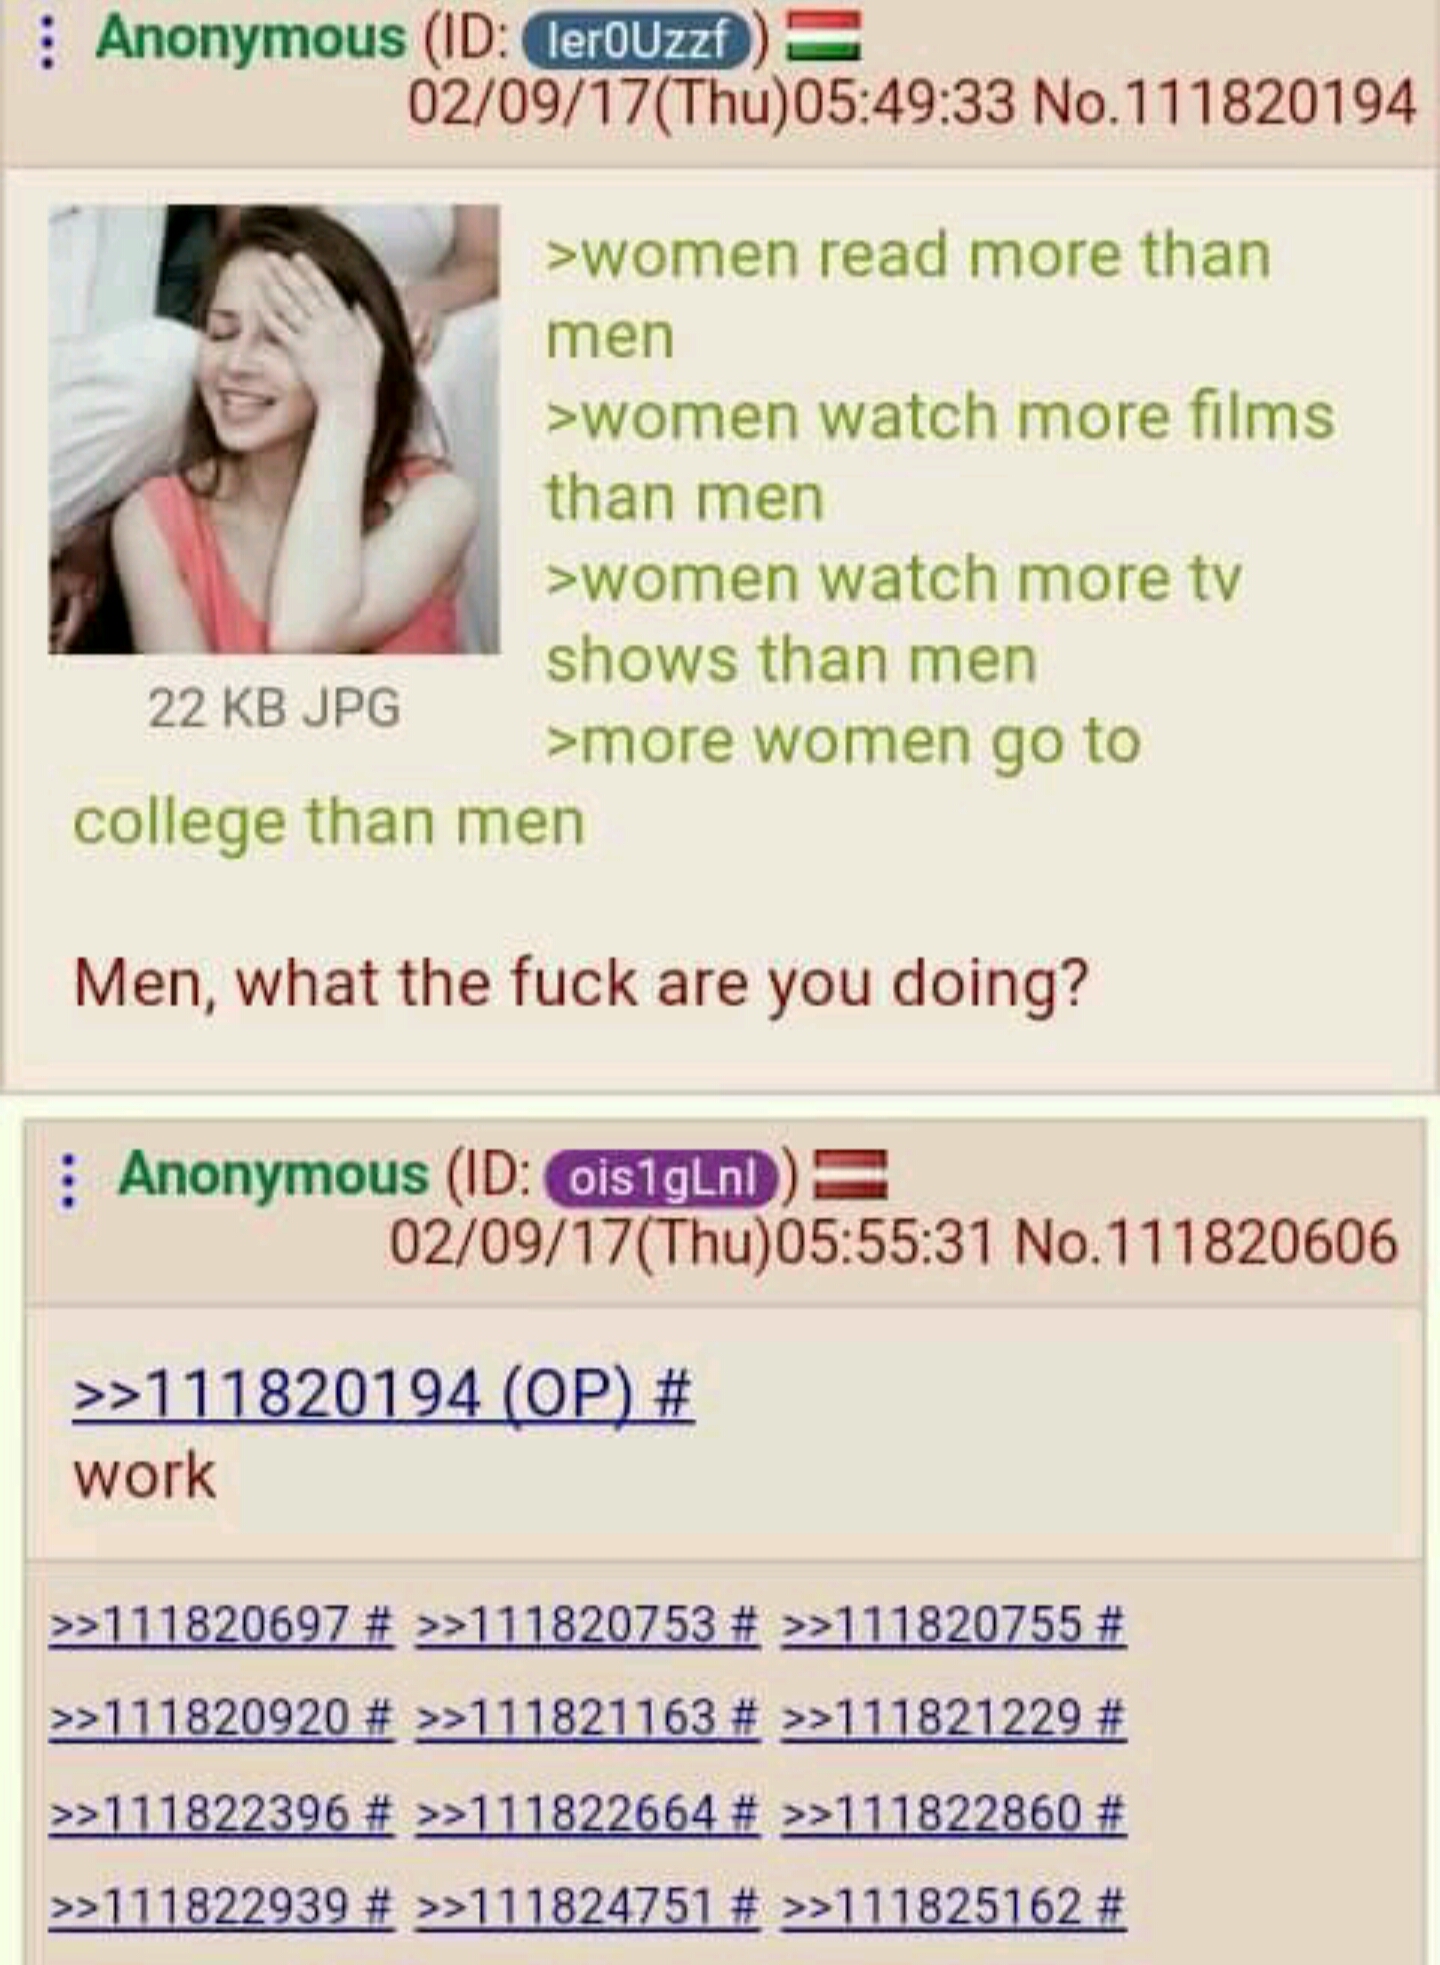 meme stream - document - Anonymous Id ler Uzz 020917Thu33 No.111820194 >women read more than men >women watch more films than men >women watch more tv shows than men 22 Kb Jpg >more women go to college than men Men, what the fuck are you doing? Anonymous 